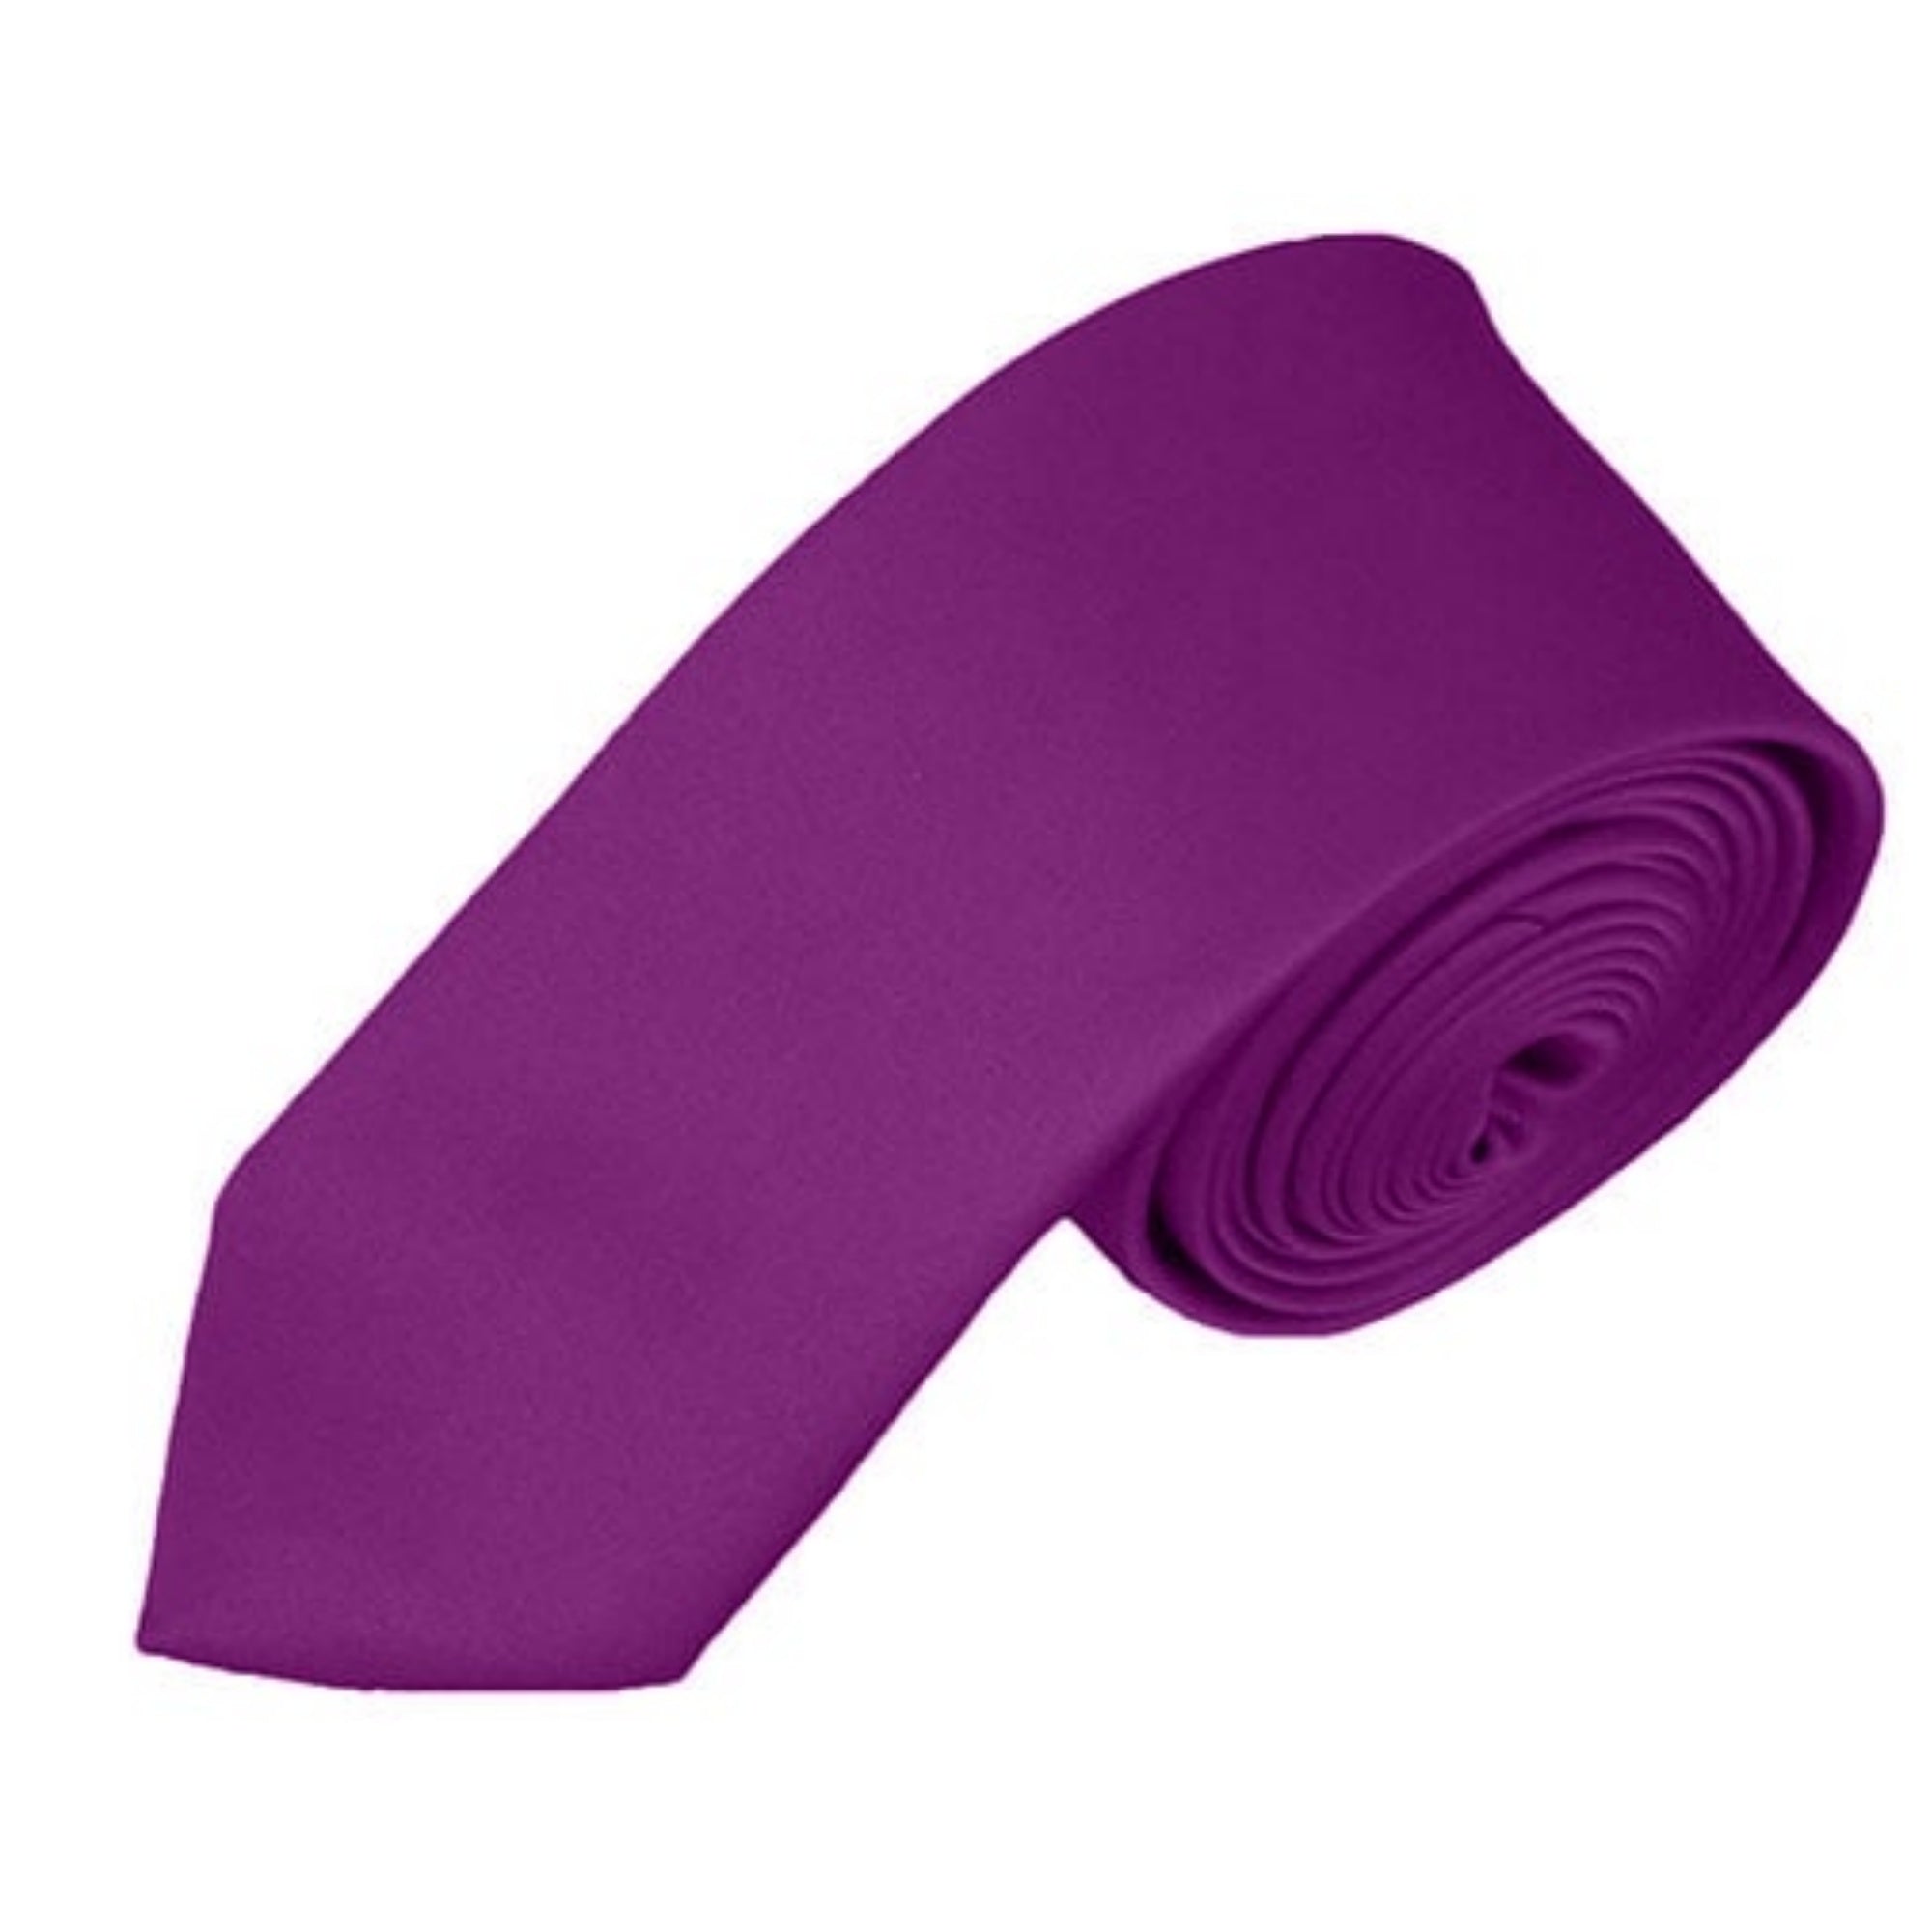 TheDapperTie Boy's Solid Color 2.75 Inch Wide And 48 Inch Long Neckties Neck Tie TheDapperTie Plum Violet  